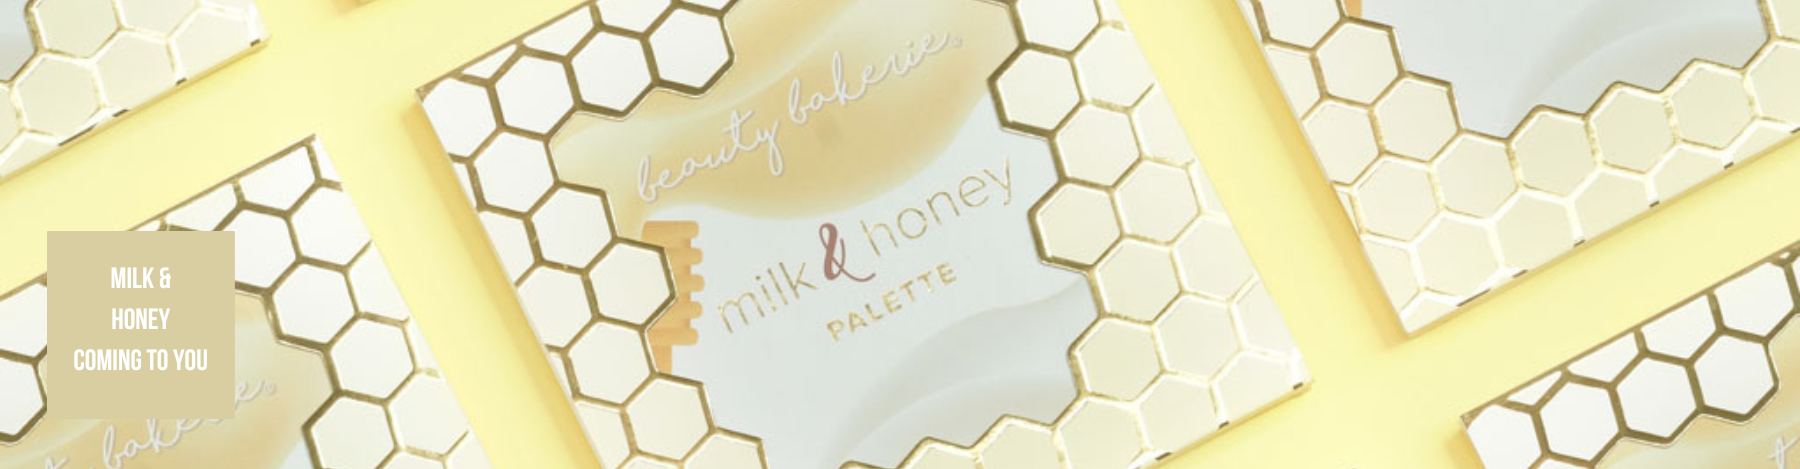 Milk & Honey Palette Launching Exclusively at Riley Rose